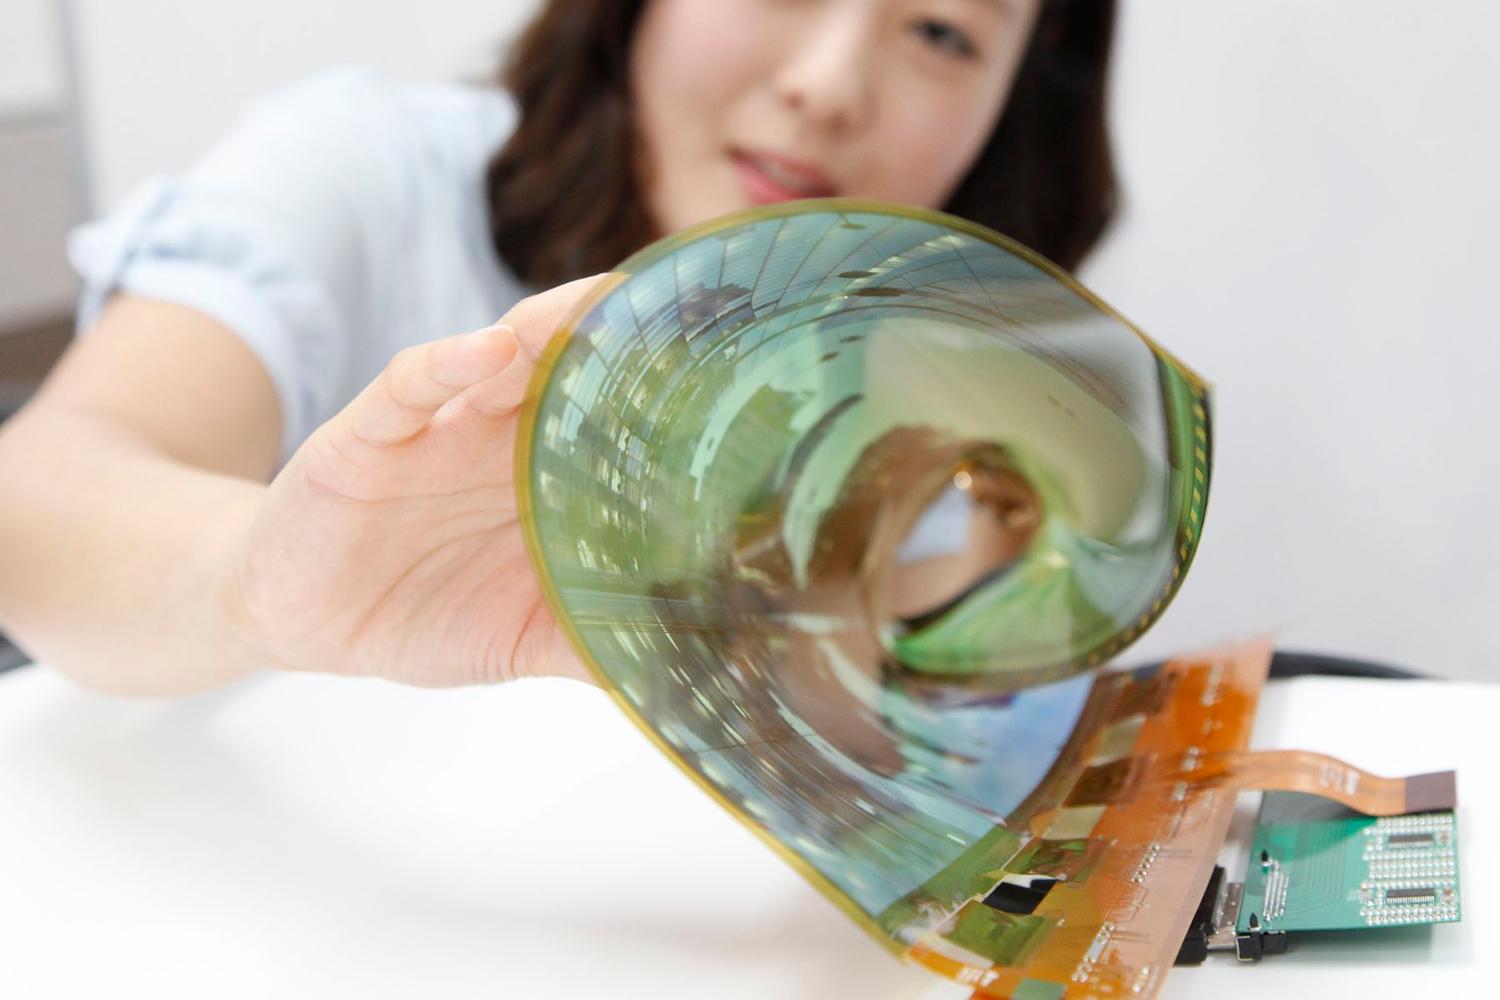 LG Oled display rollable